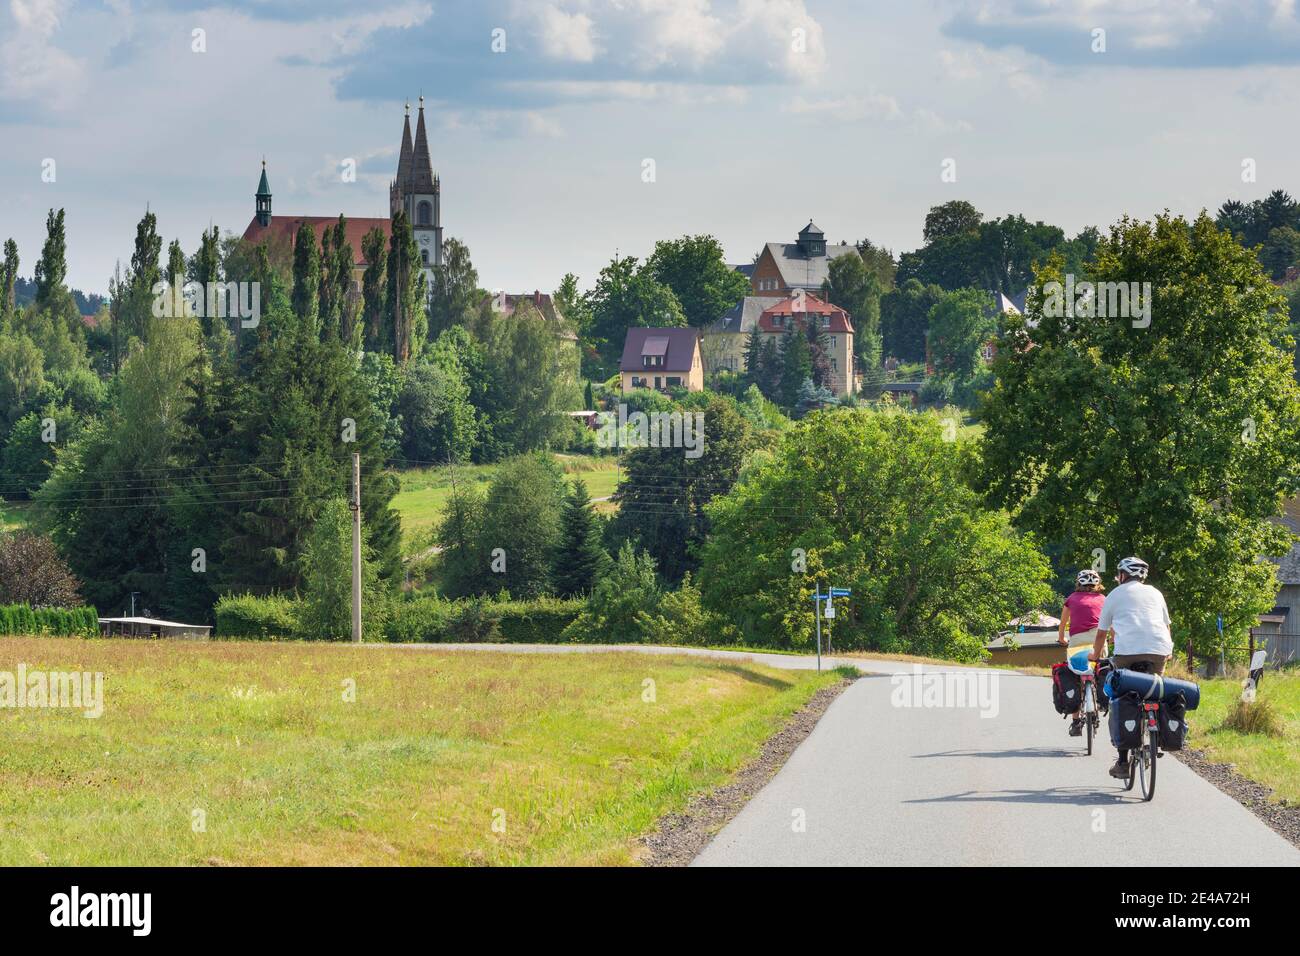 Kirschau High Resolution Stock Photography and Images - Alamy